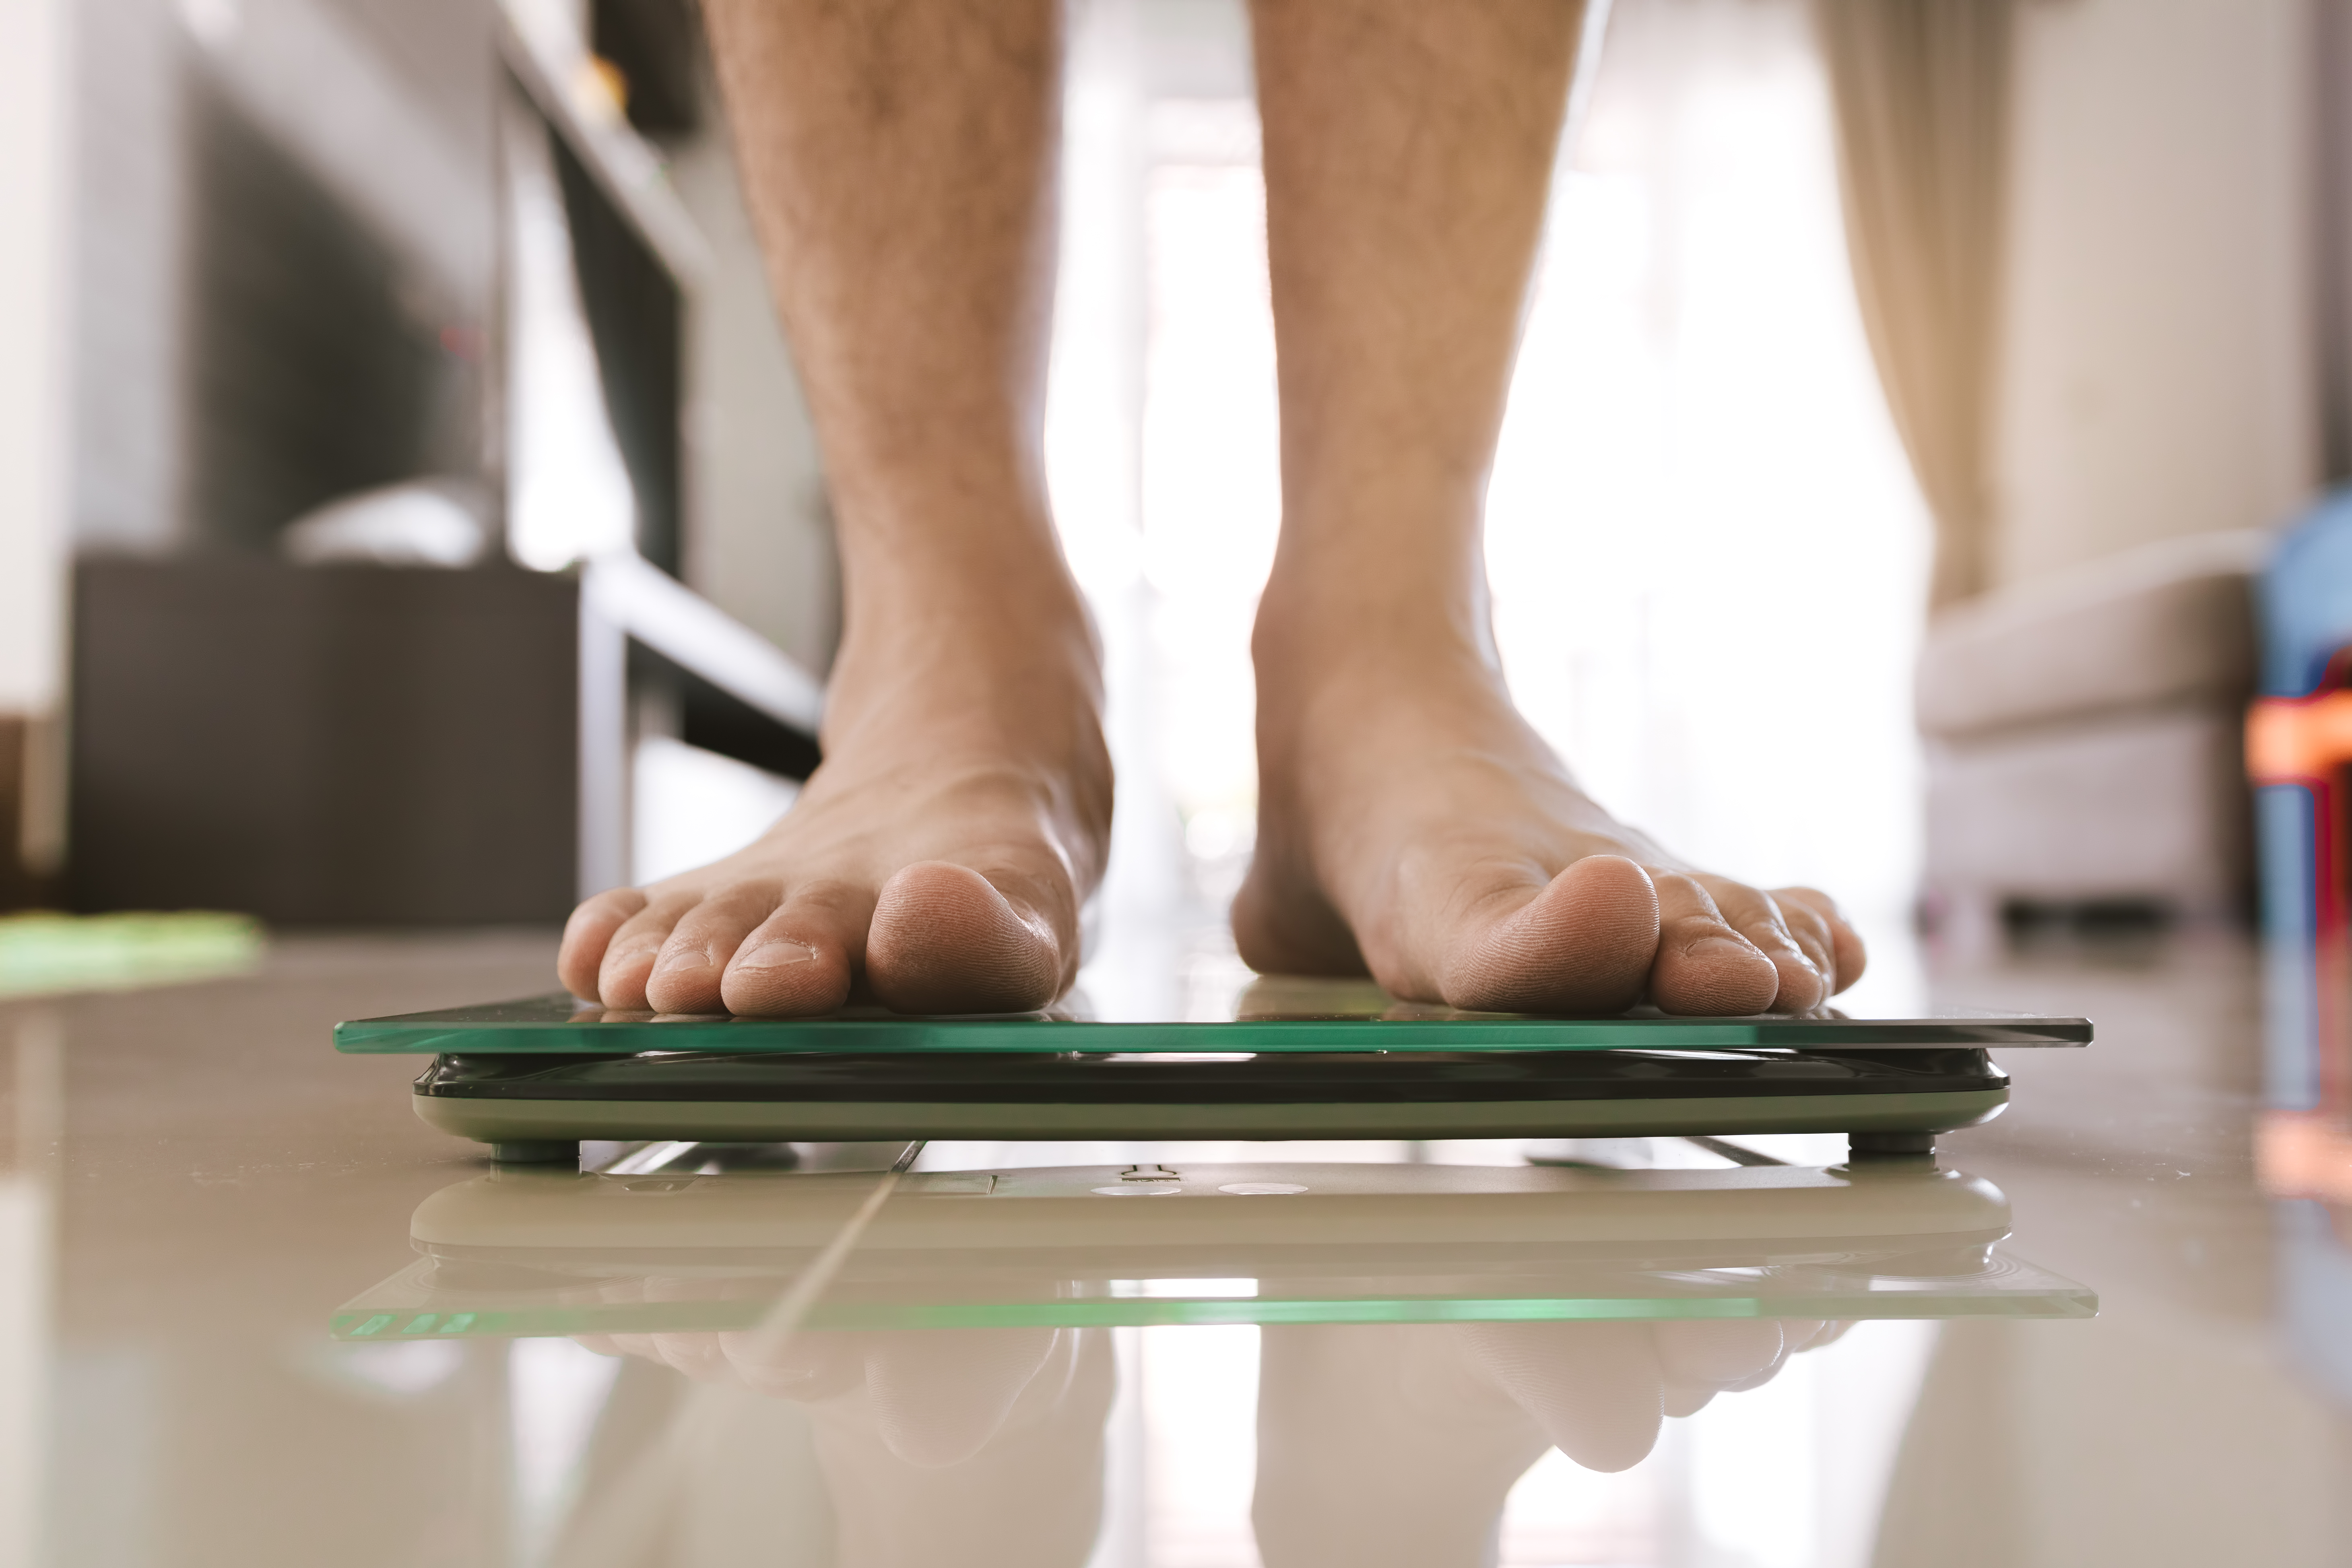 Obesity and Restless Leg Syndrome